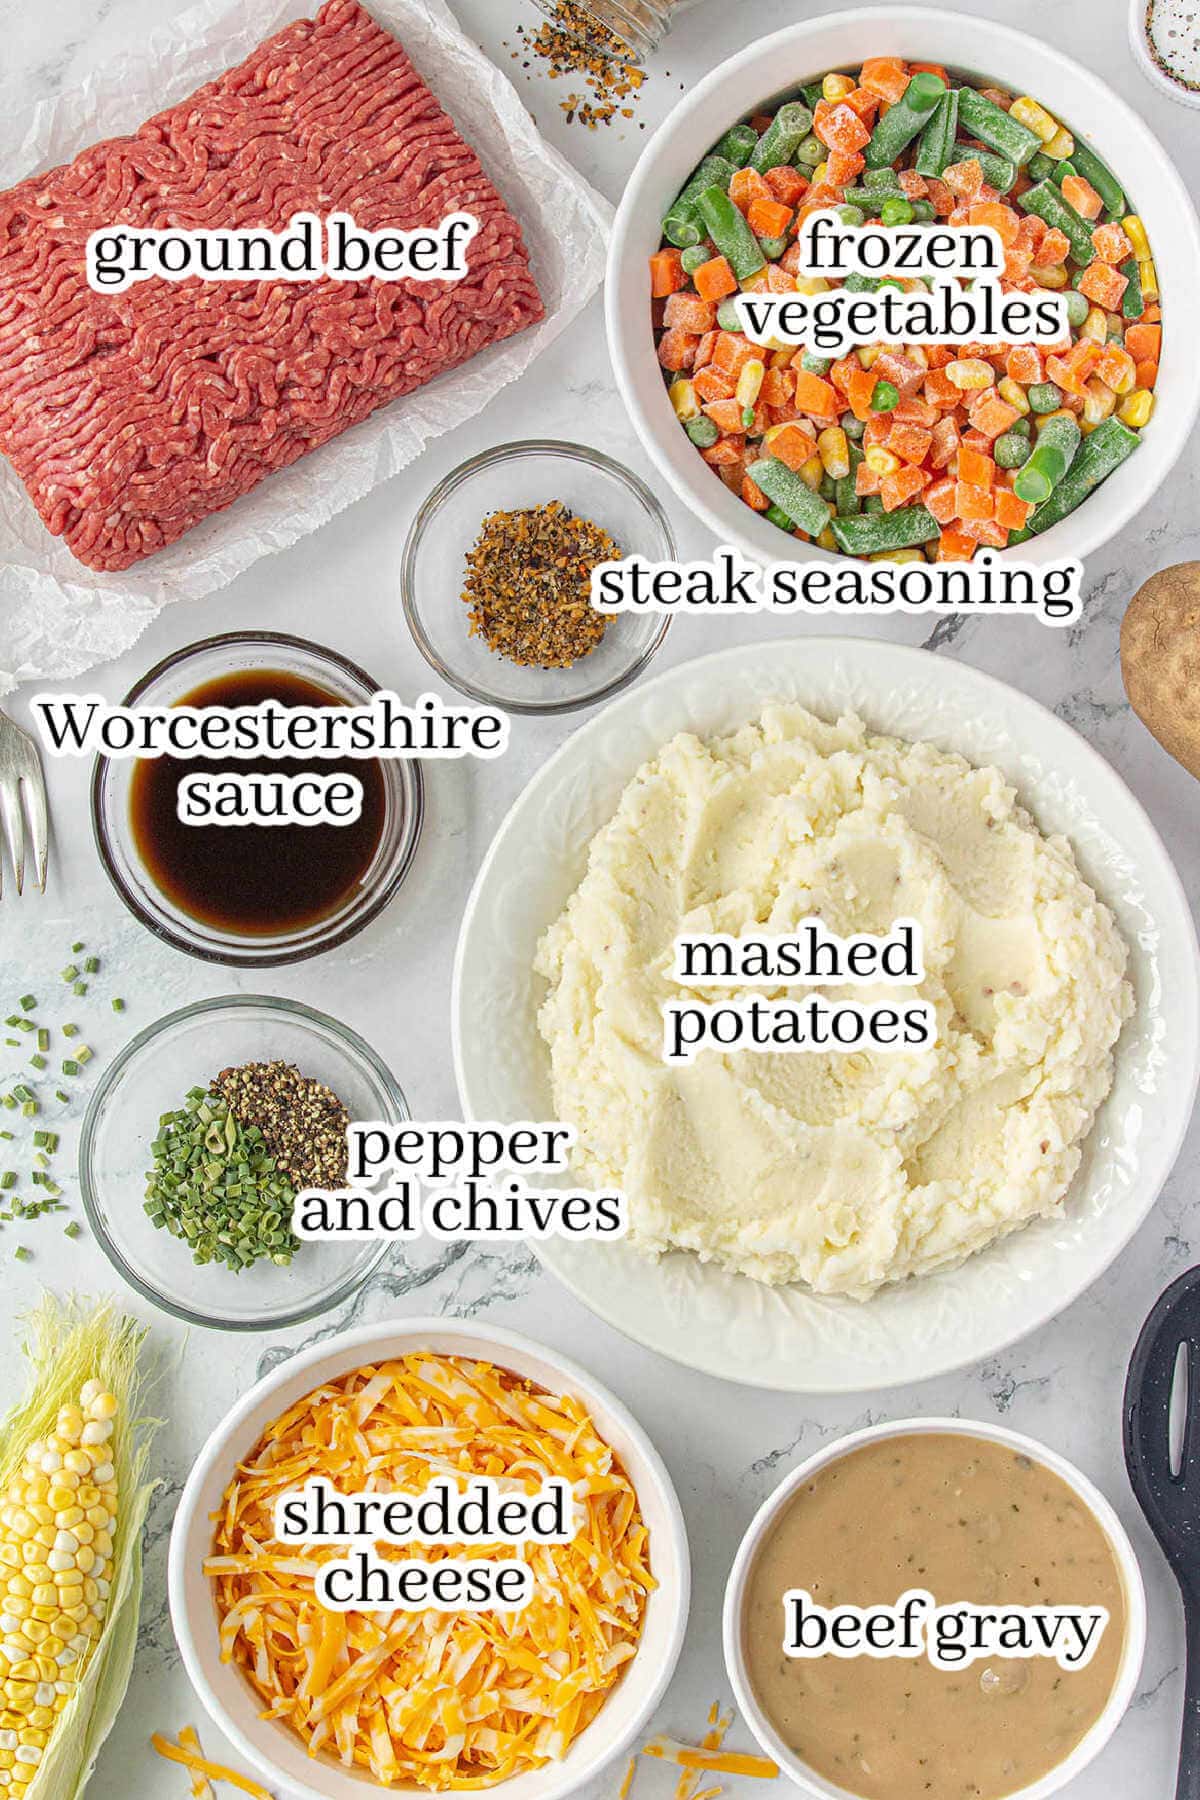 Ingredients to make ground beef recipe, with print overlay.